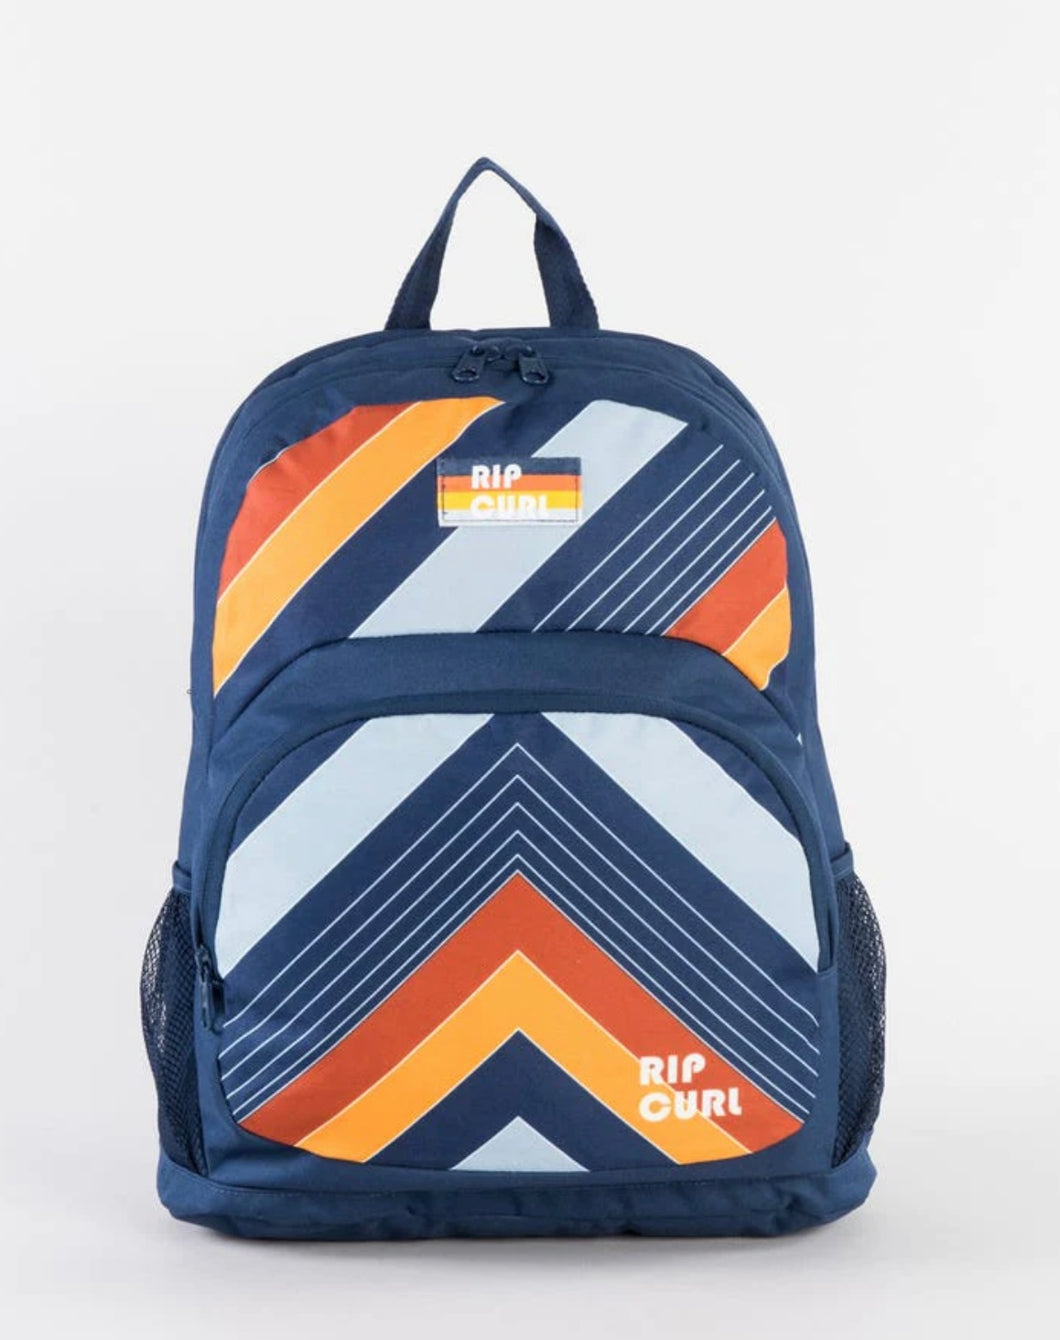 Primary Backpack